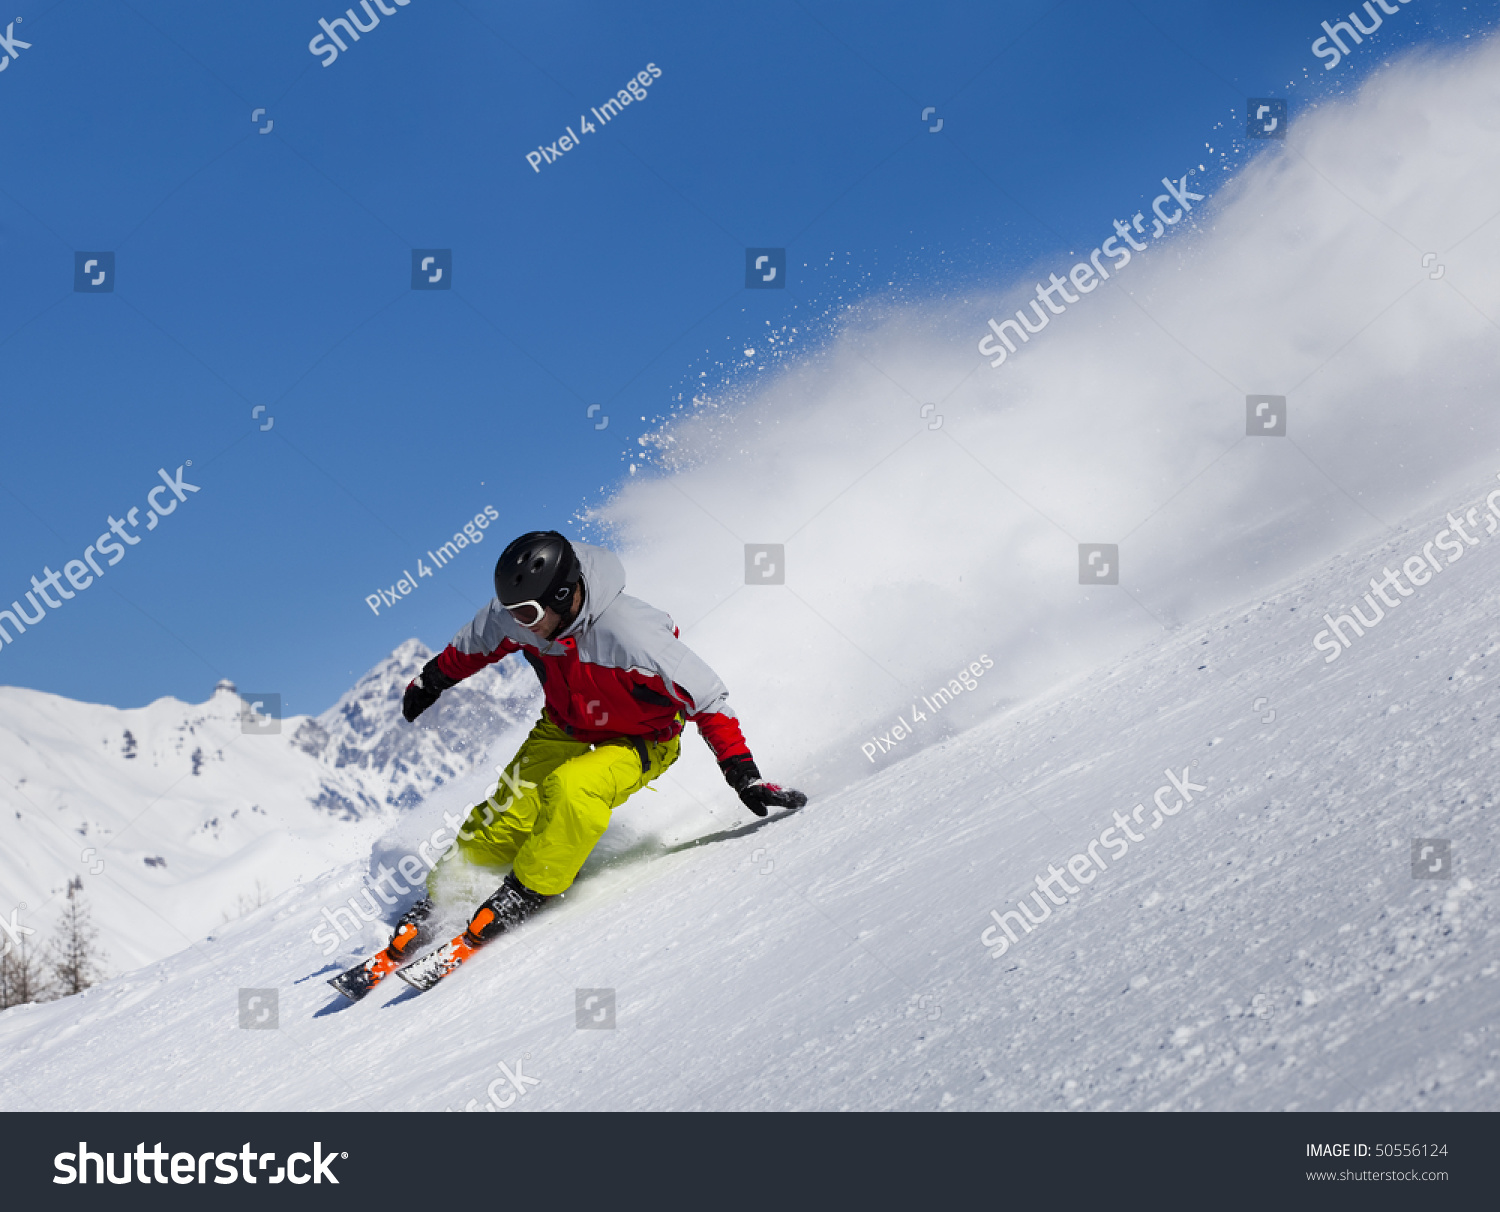 Aggressive Skier In The Snow Powder Skiing Fast Stock Photo 50556124 ...